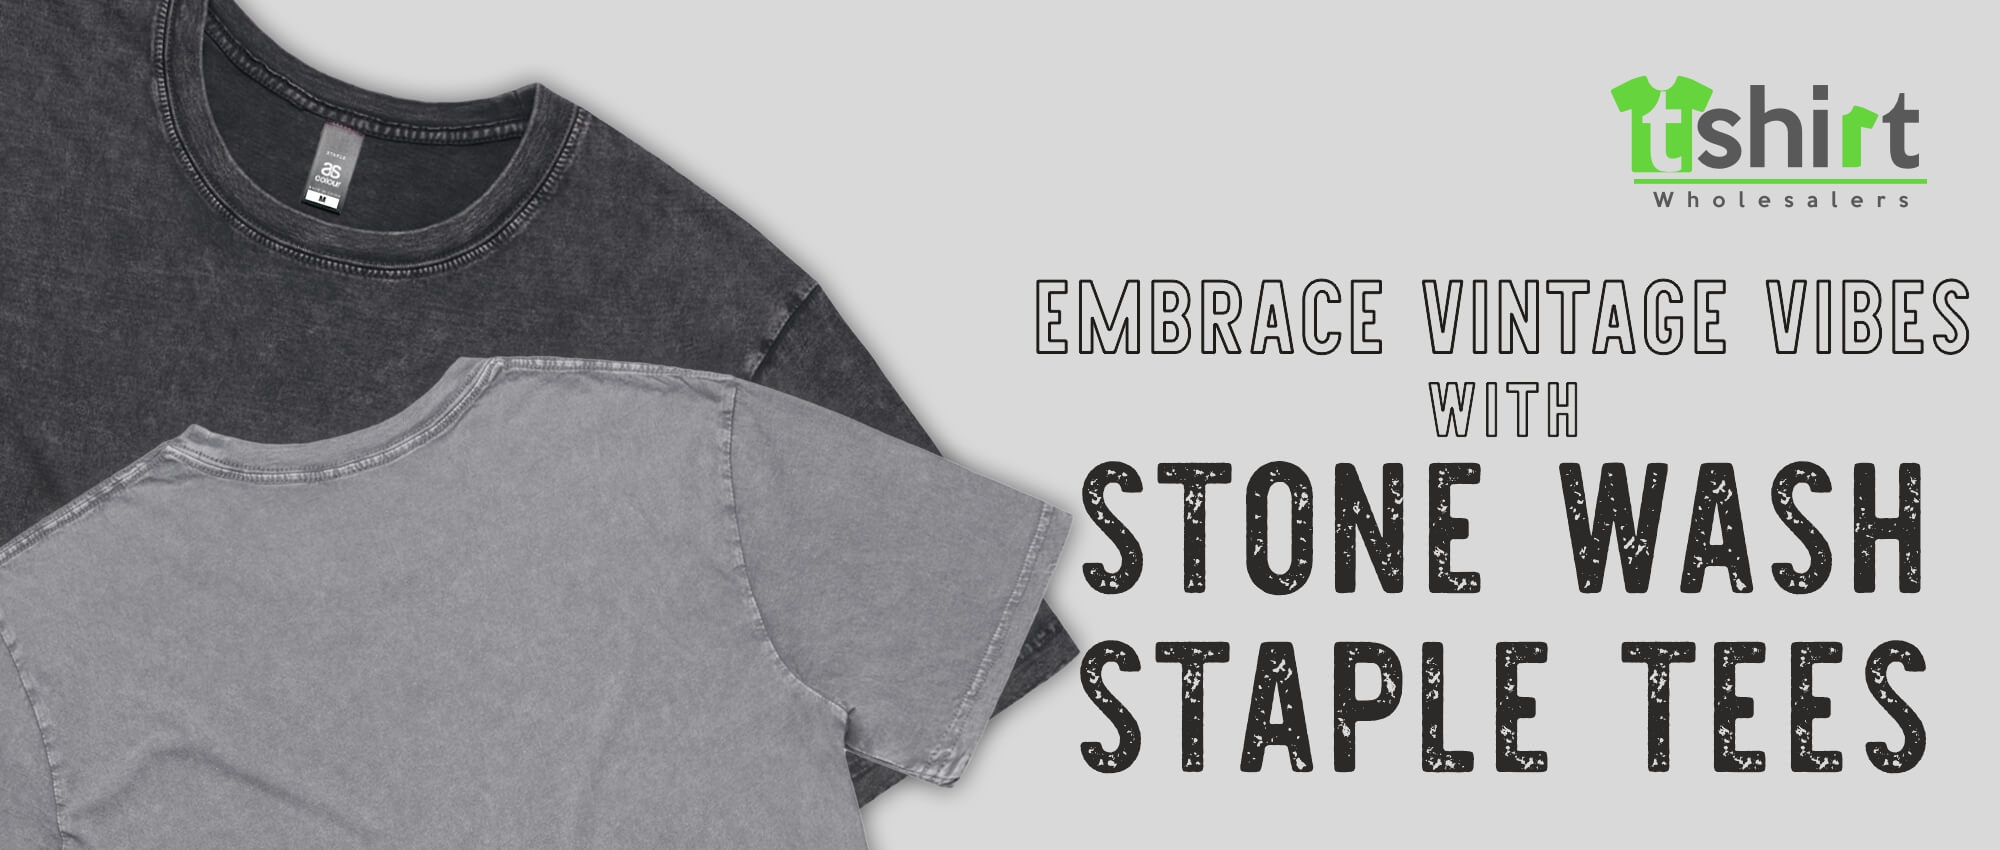 EMBRACE VINTAGE VIBES WITH STONE WASH STAPLE TEES